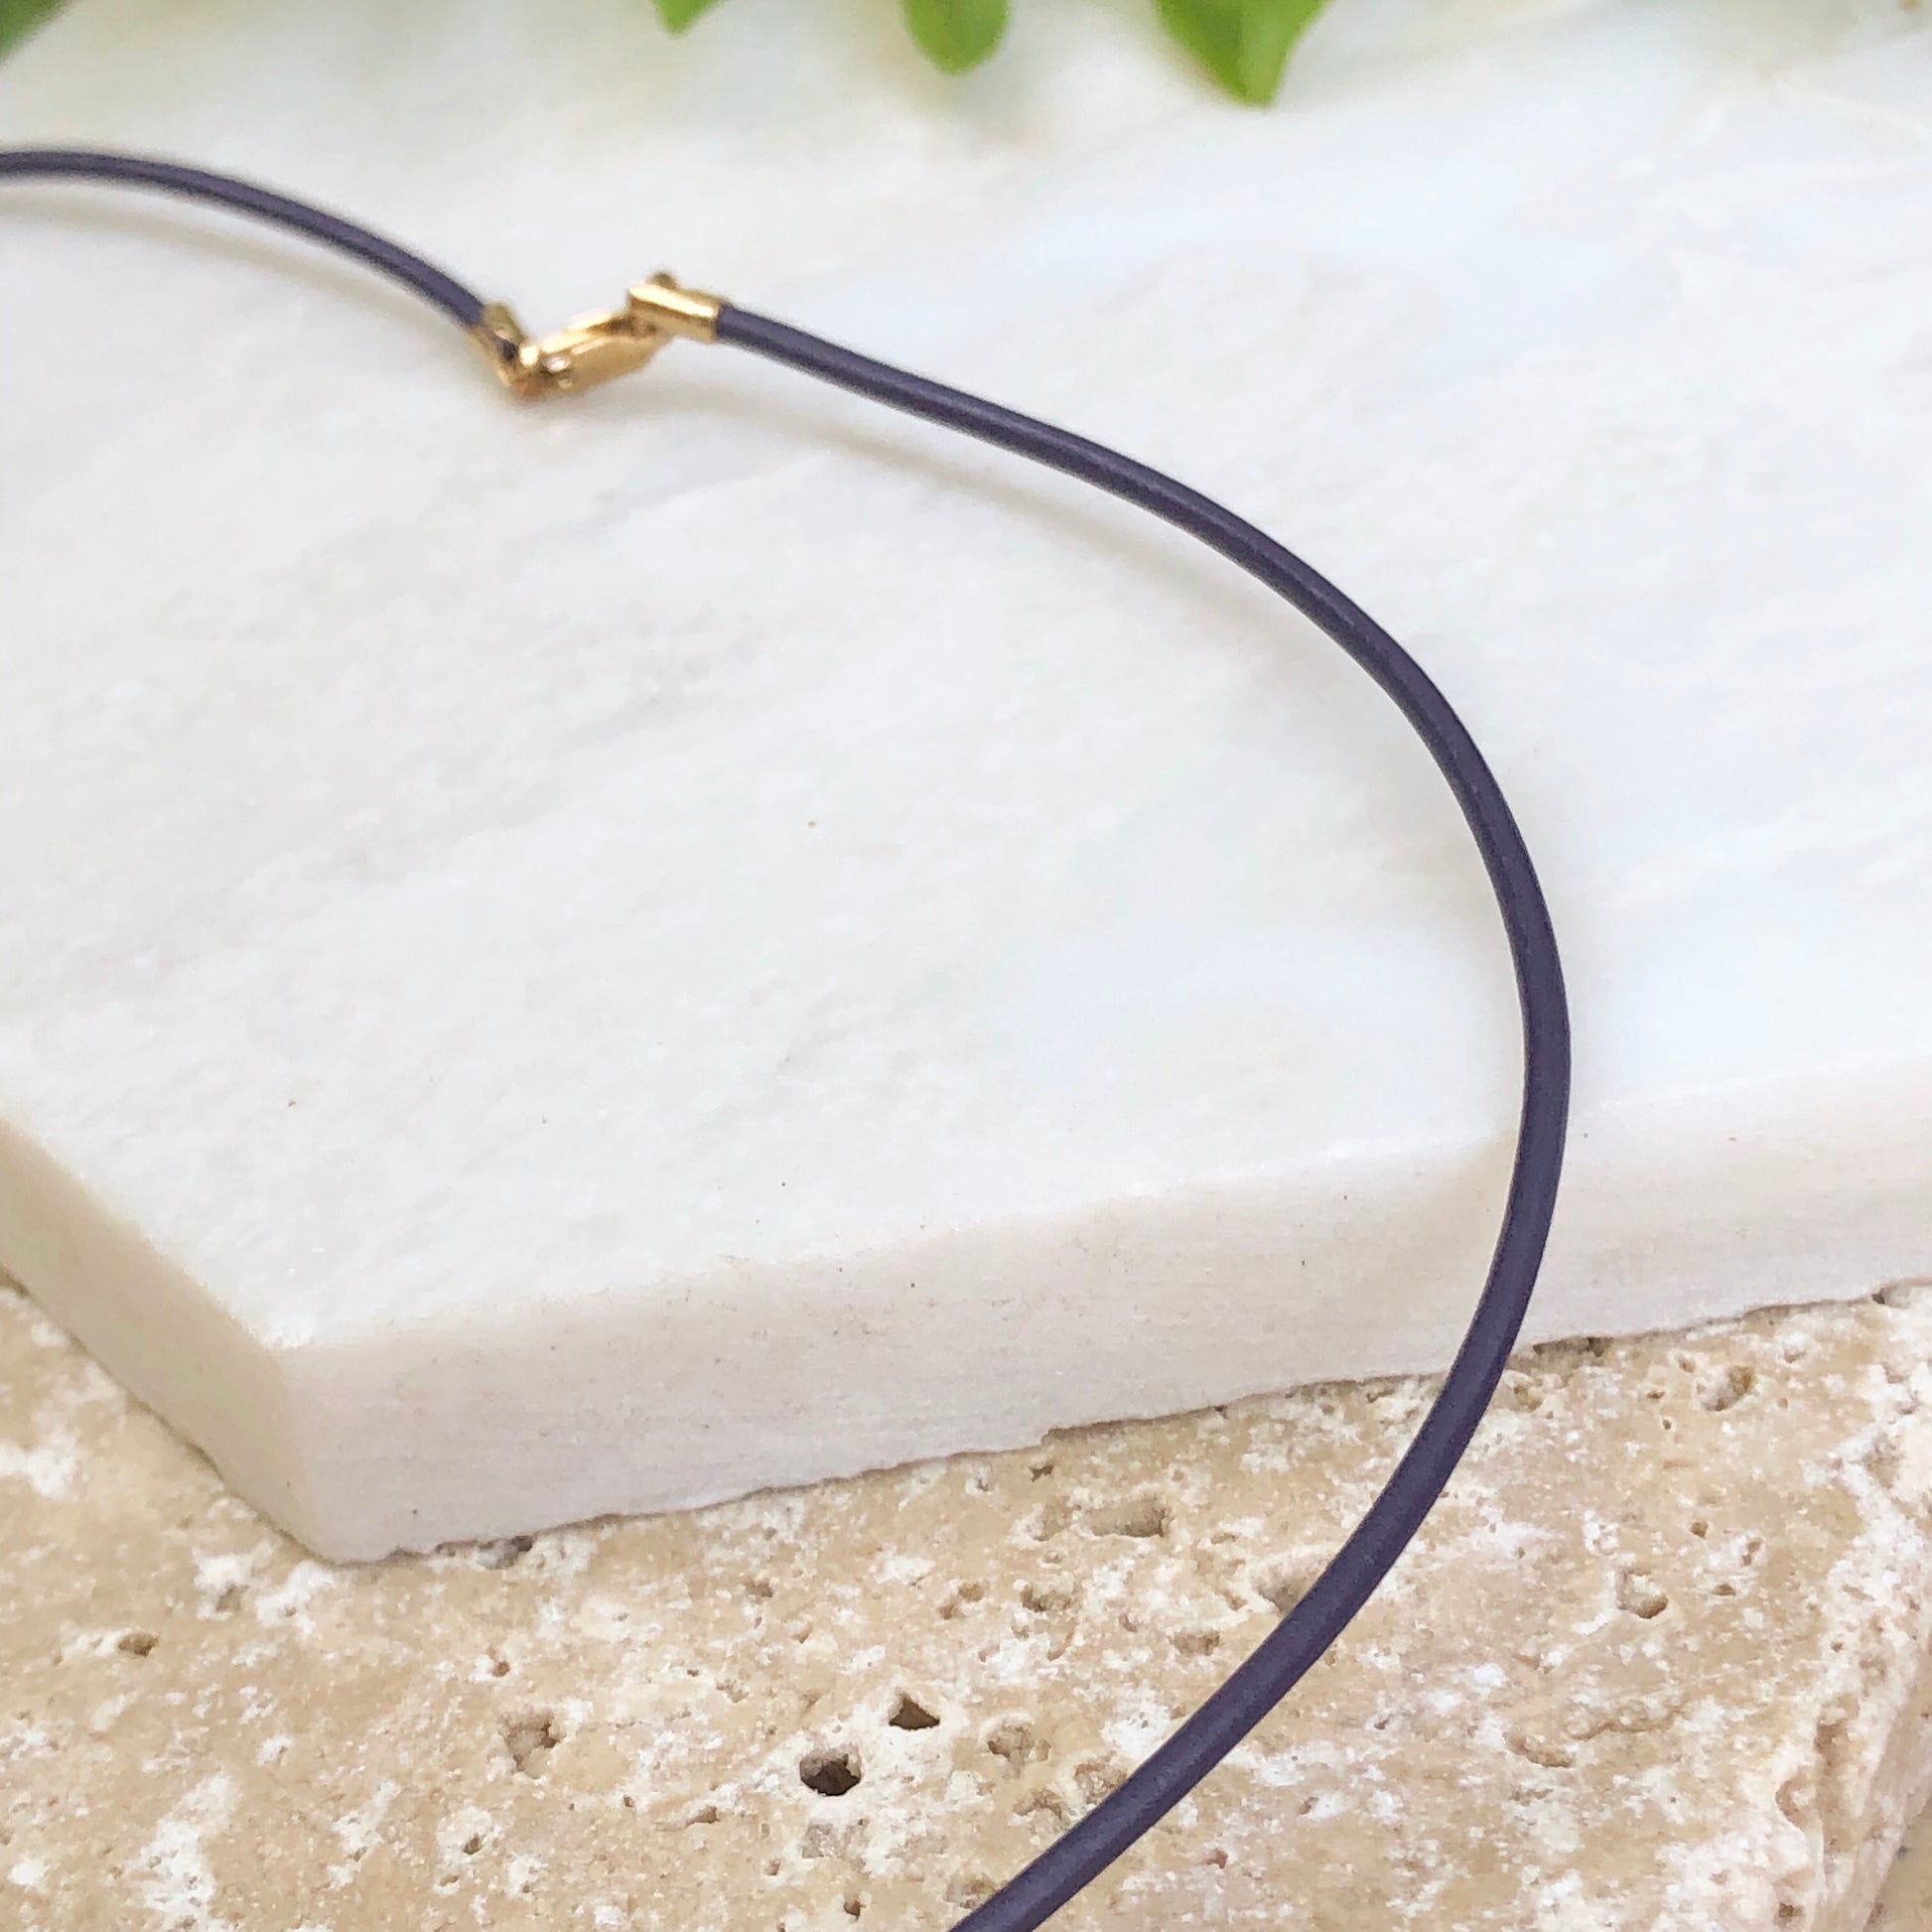 14KT Yellow Gold Violet Leather Cord Necklace 1.5mm/ 16", 14KT Yellow Gold Violet Leather Cord Necklace 1.5mm/ 16" - Legacy Saint Jewelry